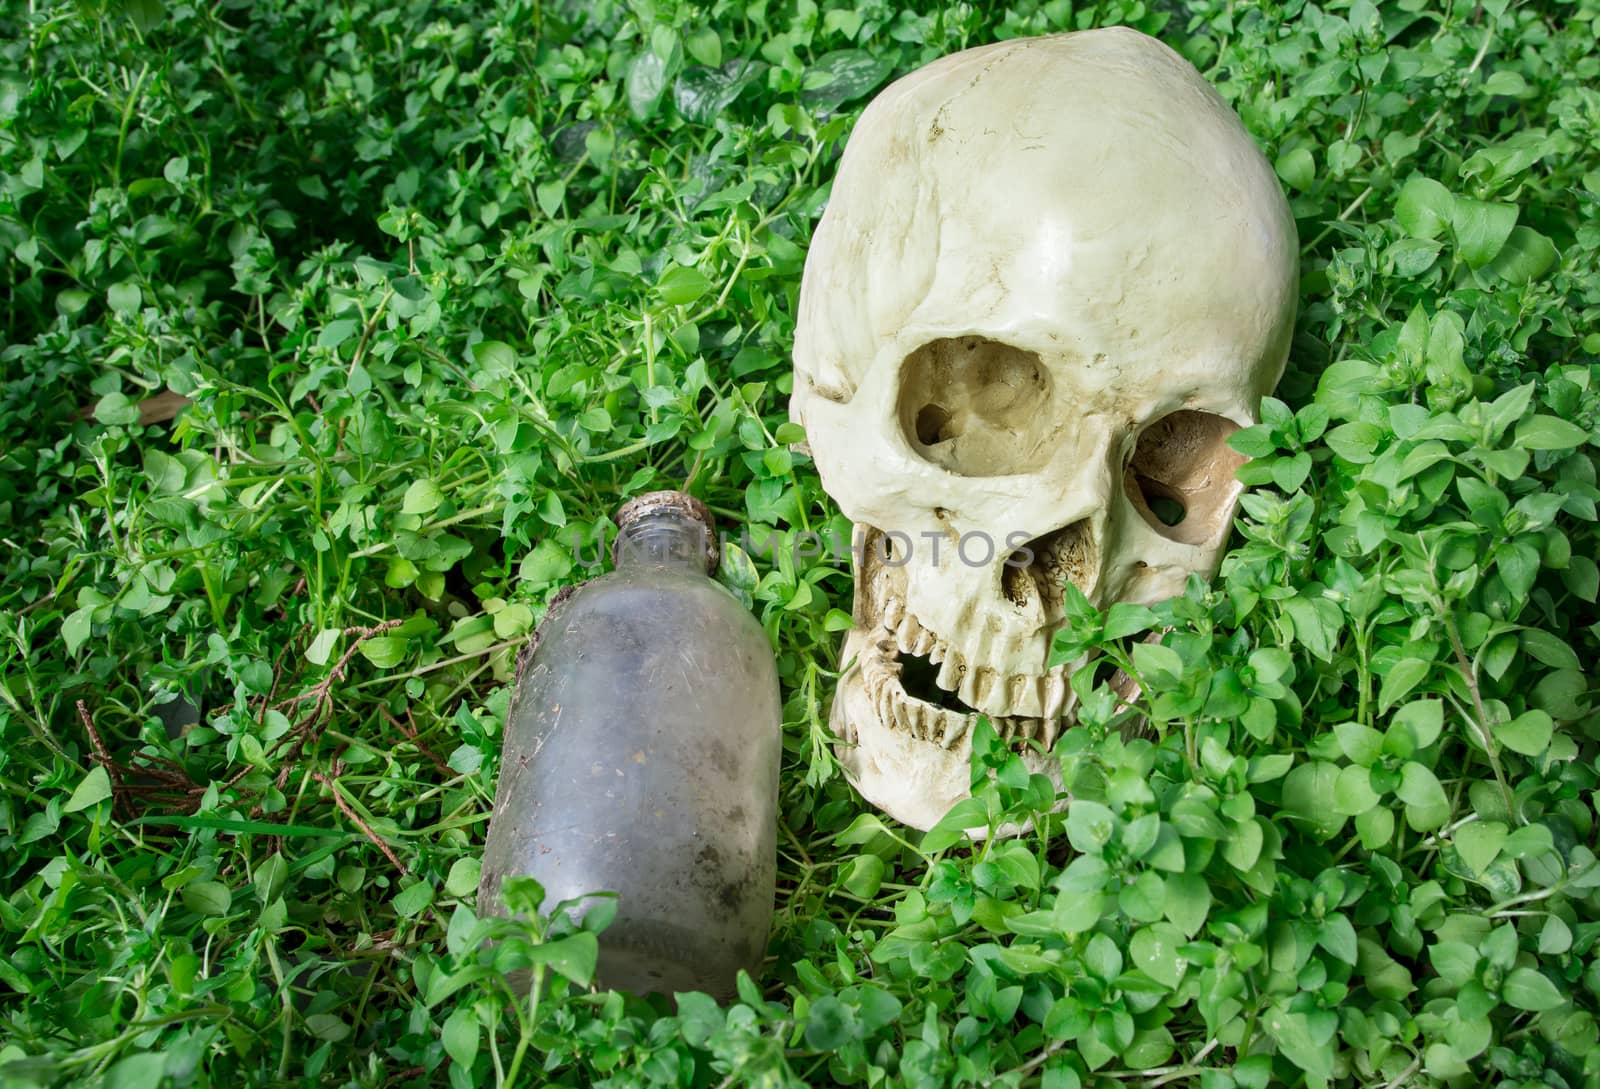 the dead human skull in the garden with old bottle